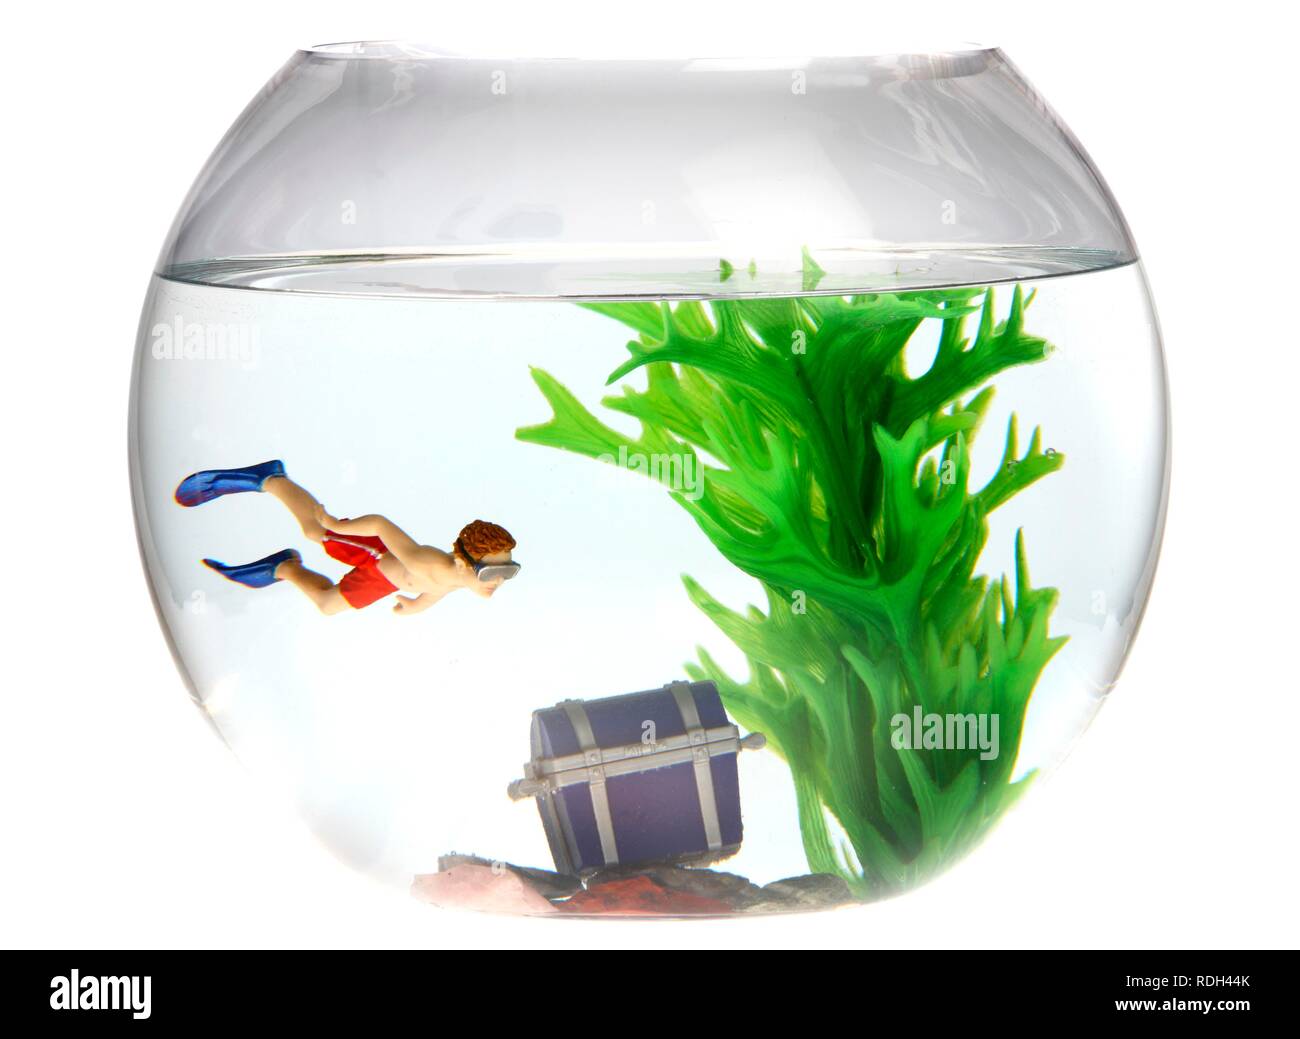 Toy diver with a treasure chest in a fish bowl, illustration Stock Photo